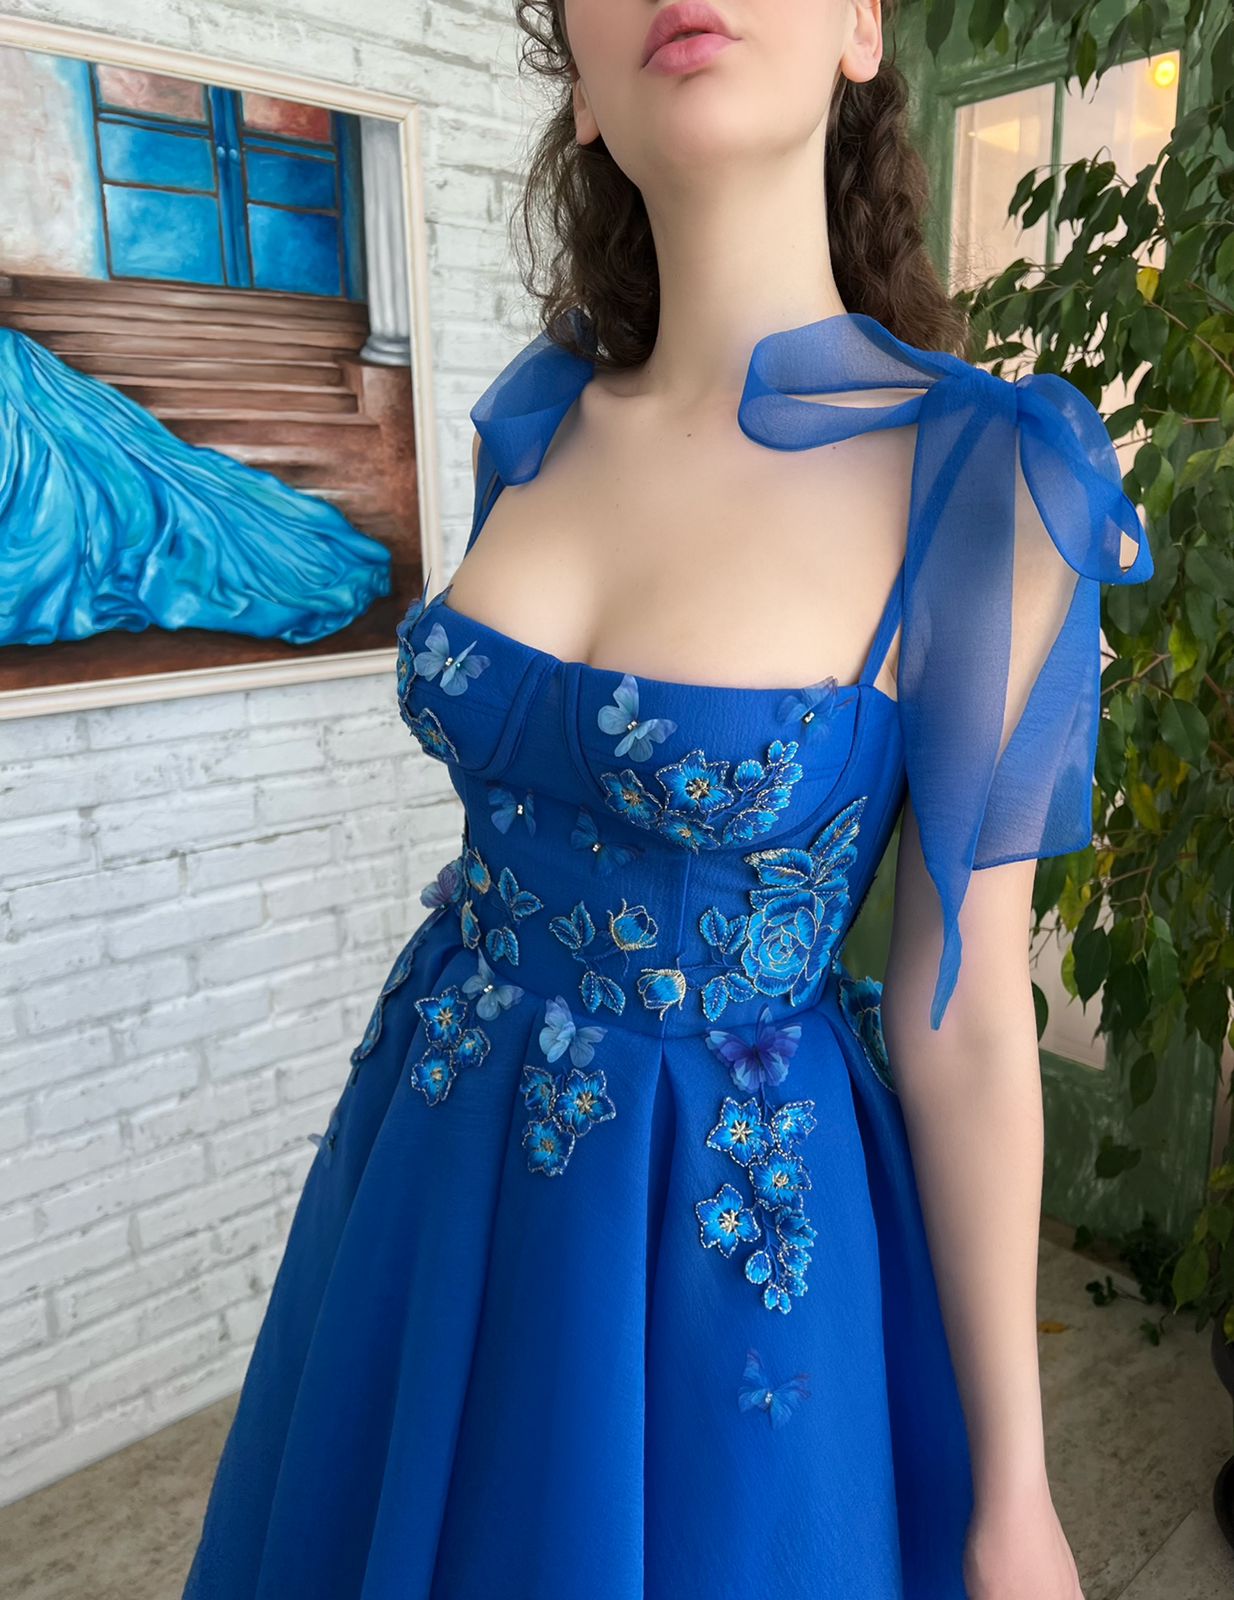 Blue midi dress with spaghetti straps, embroidery and butterflies